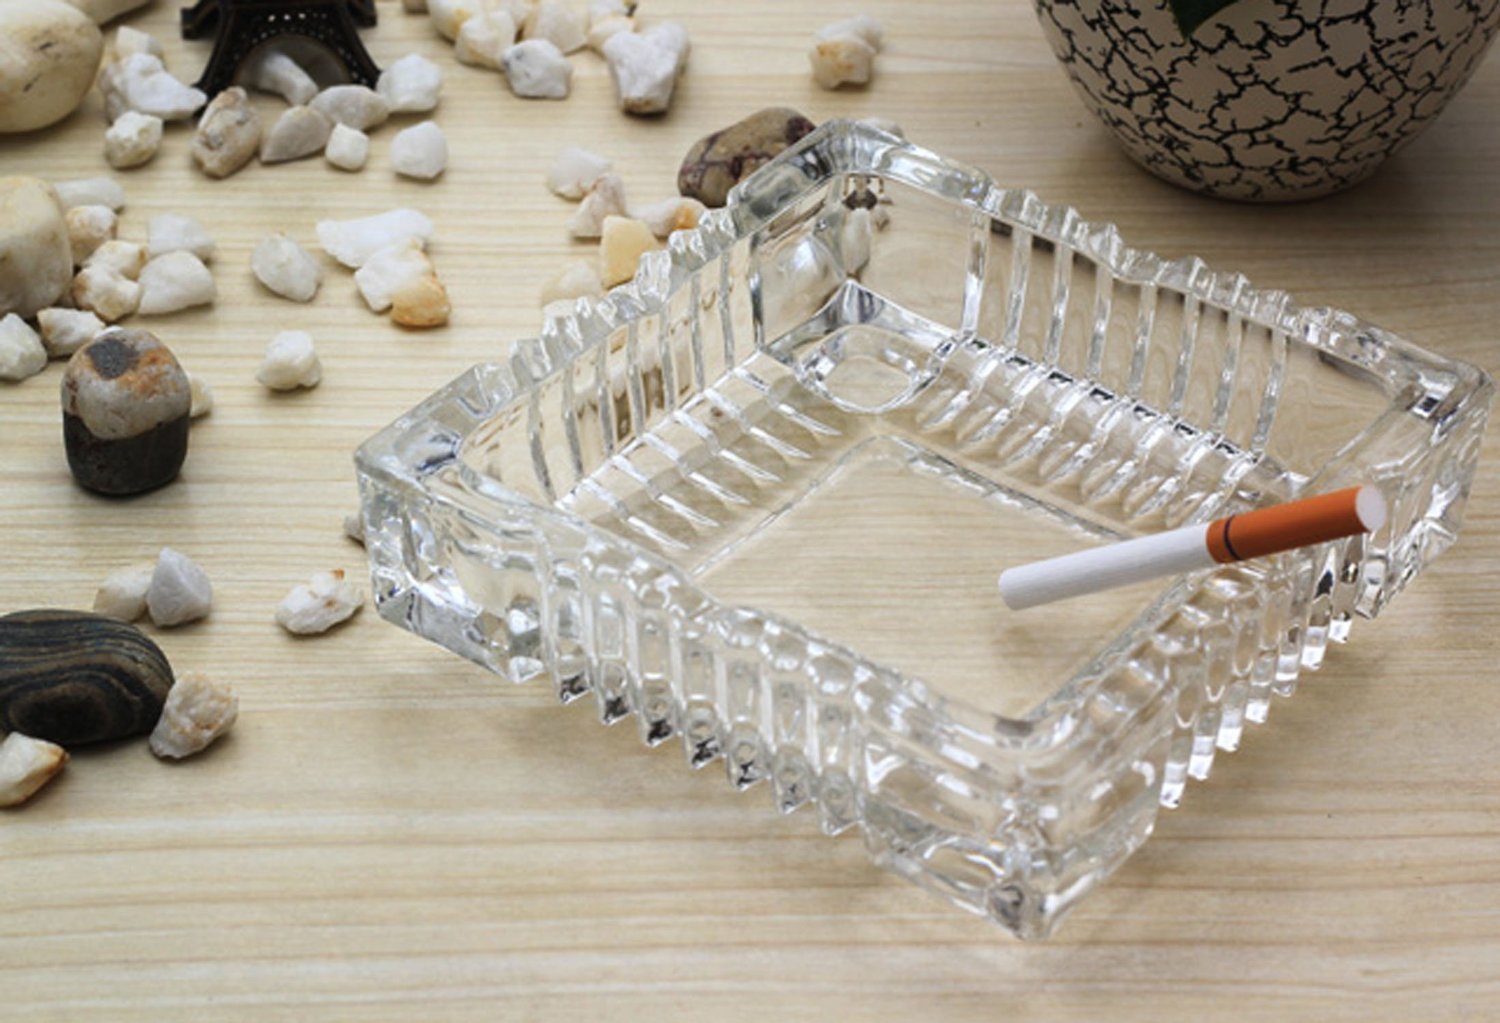 Amlong Crystal Large Classic Square Ashtray 6 inch x 6 inch